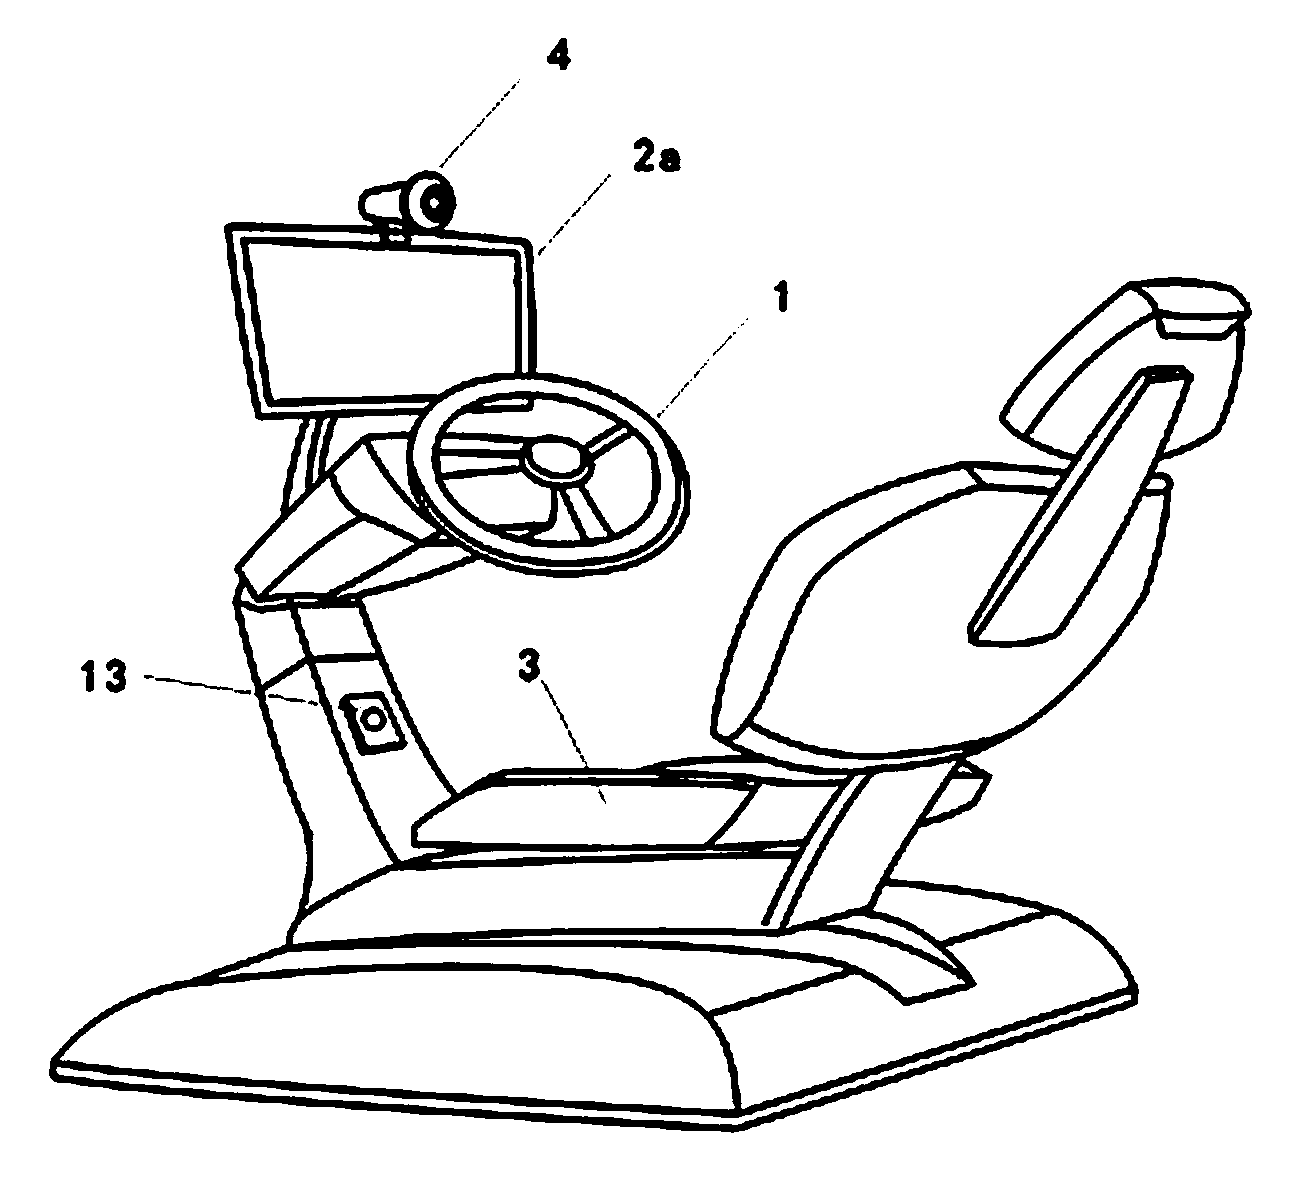 Intelligent automobile simulating driving device